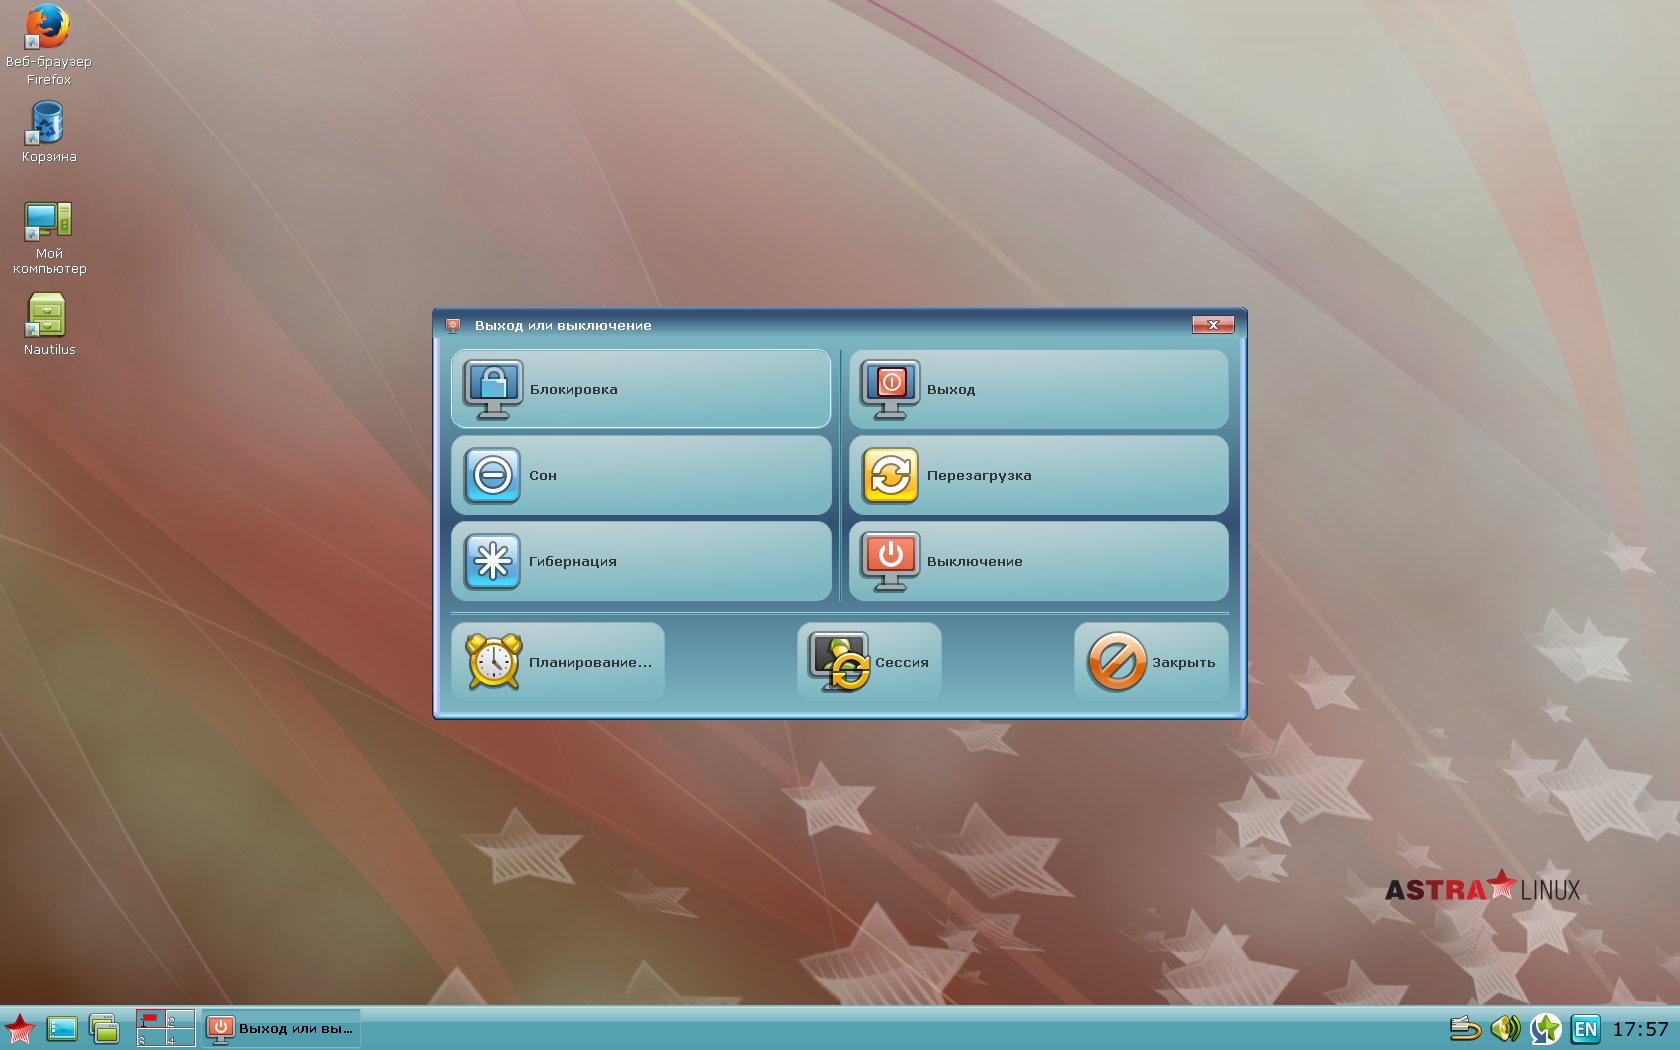 Astra Linux 1.5